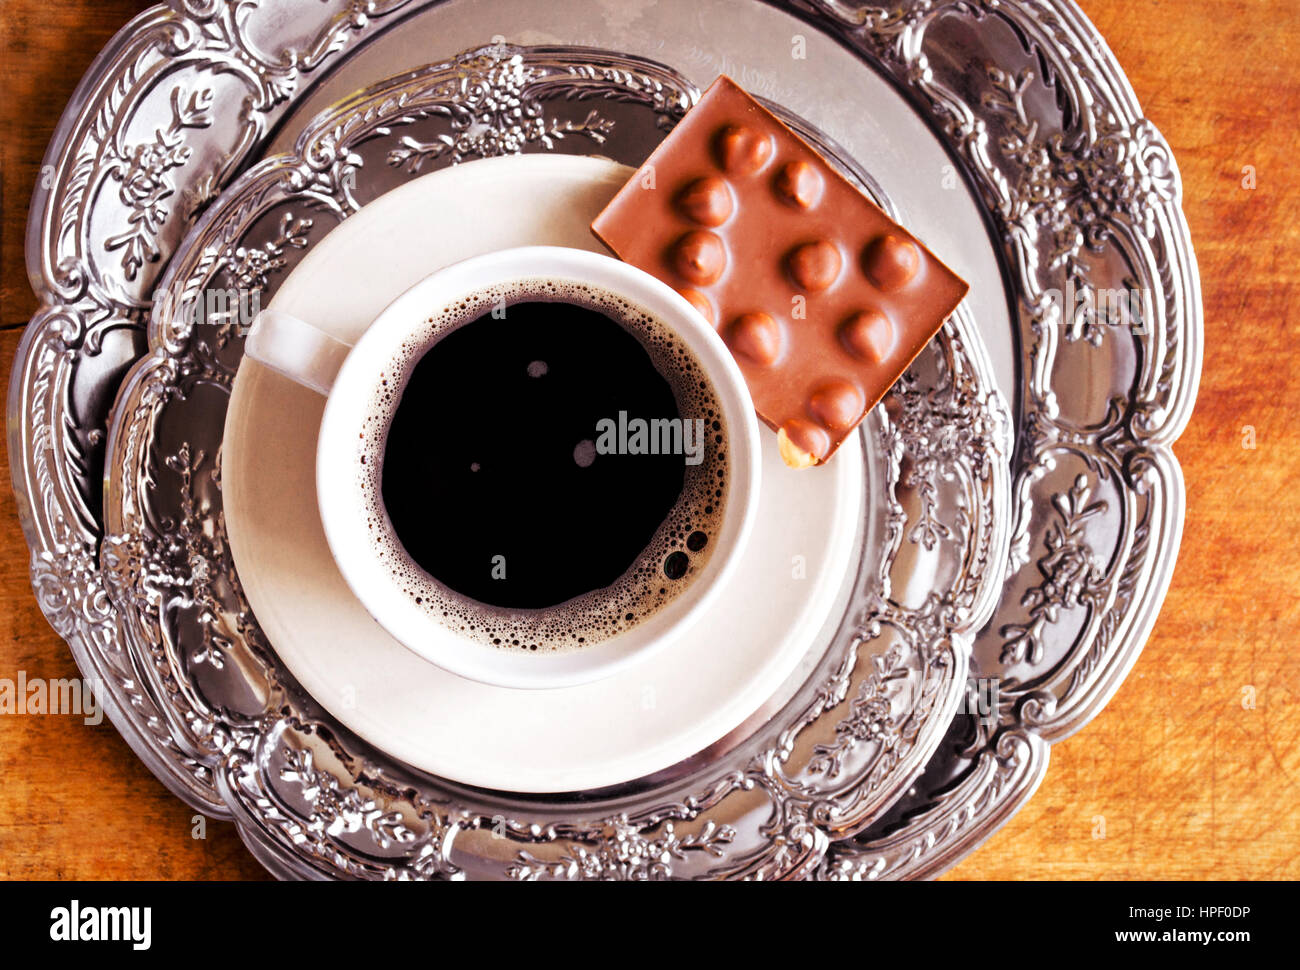 Coffee cup and chocolate bar on vintage plate Stock Photo